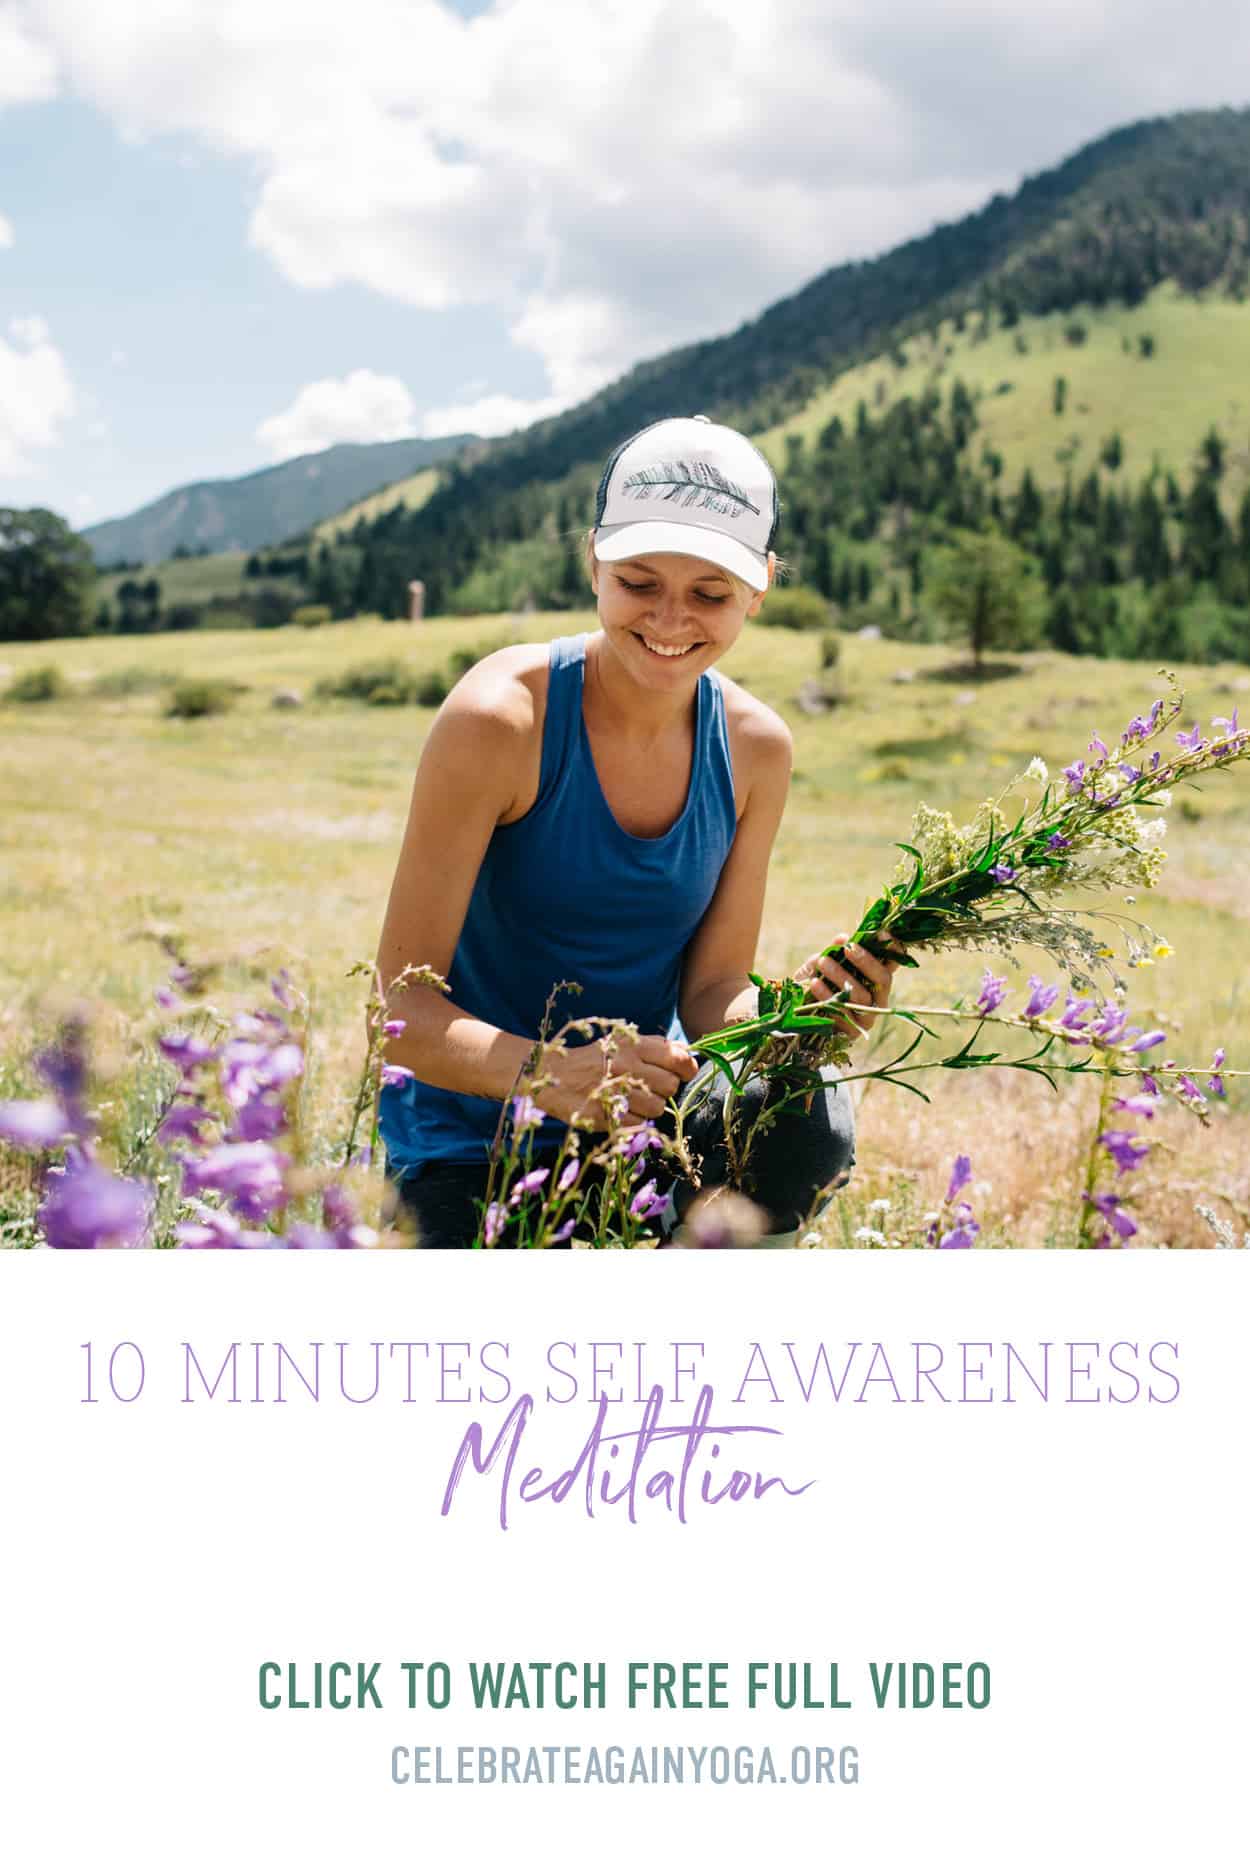 "10 minutes self awareness meditation" click to watch free full video, photo of person picking wild flowers in the mountains wearing a hat